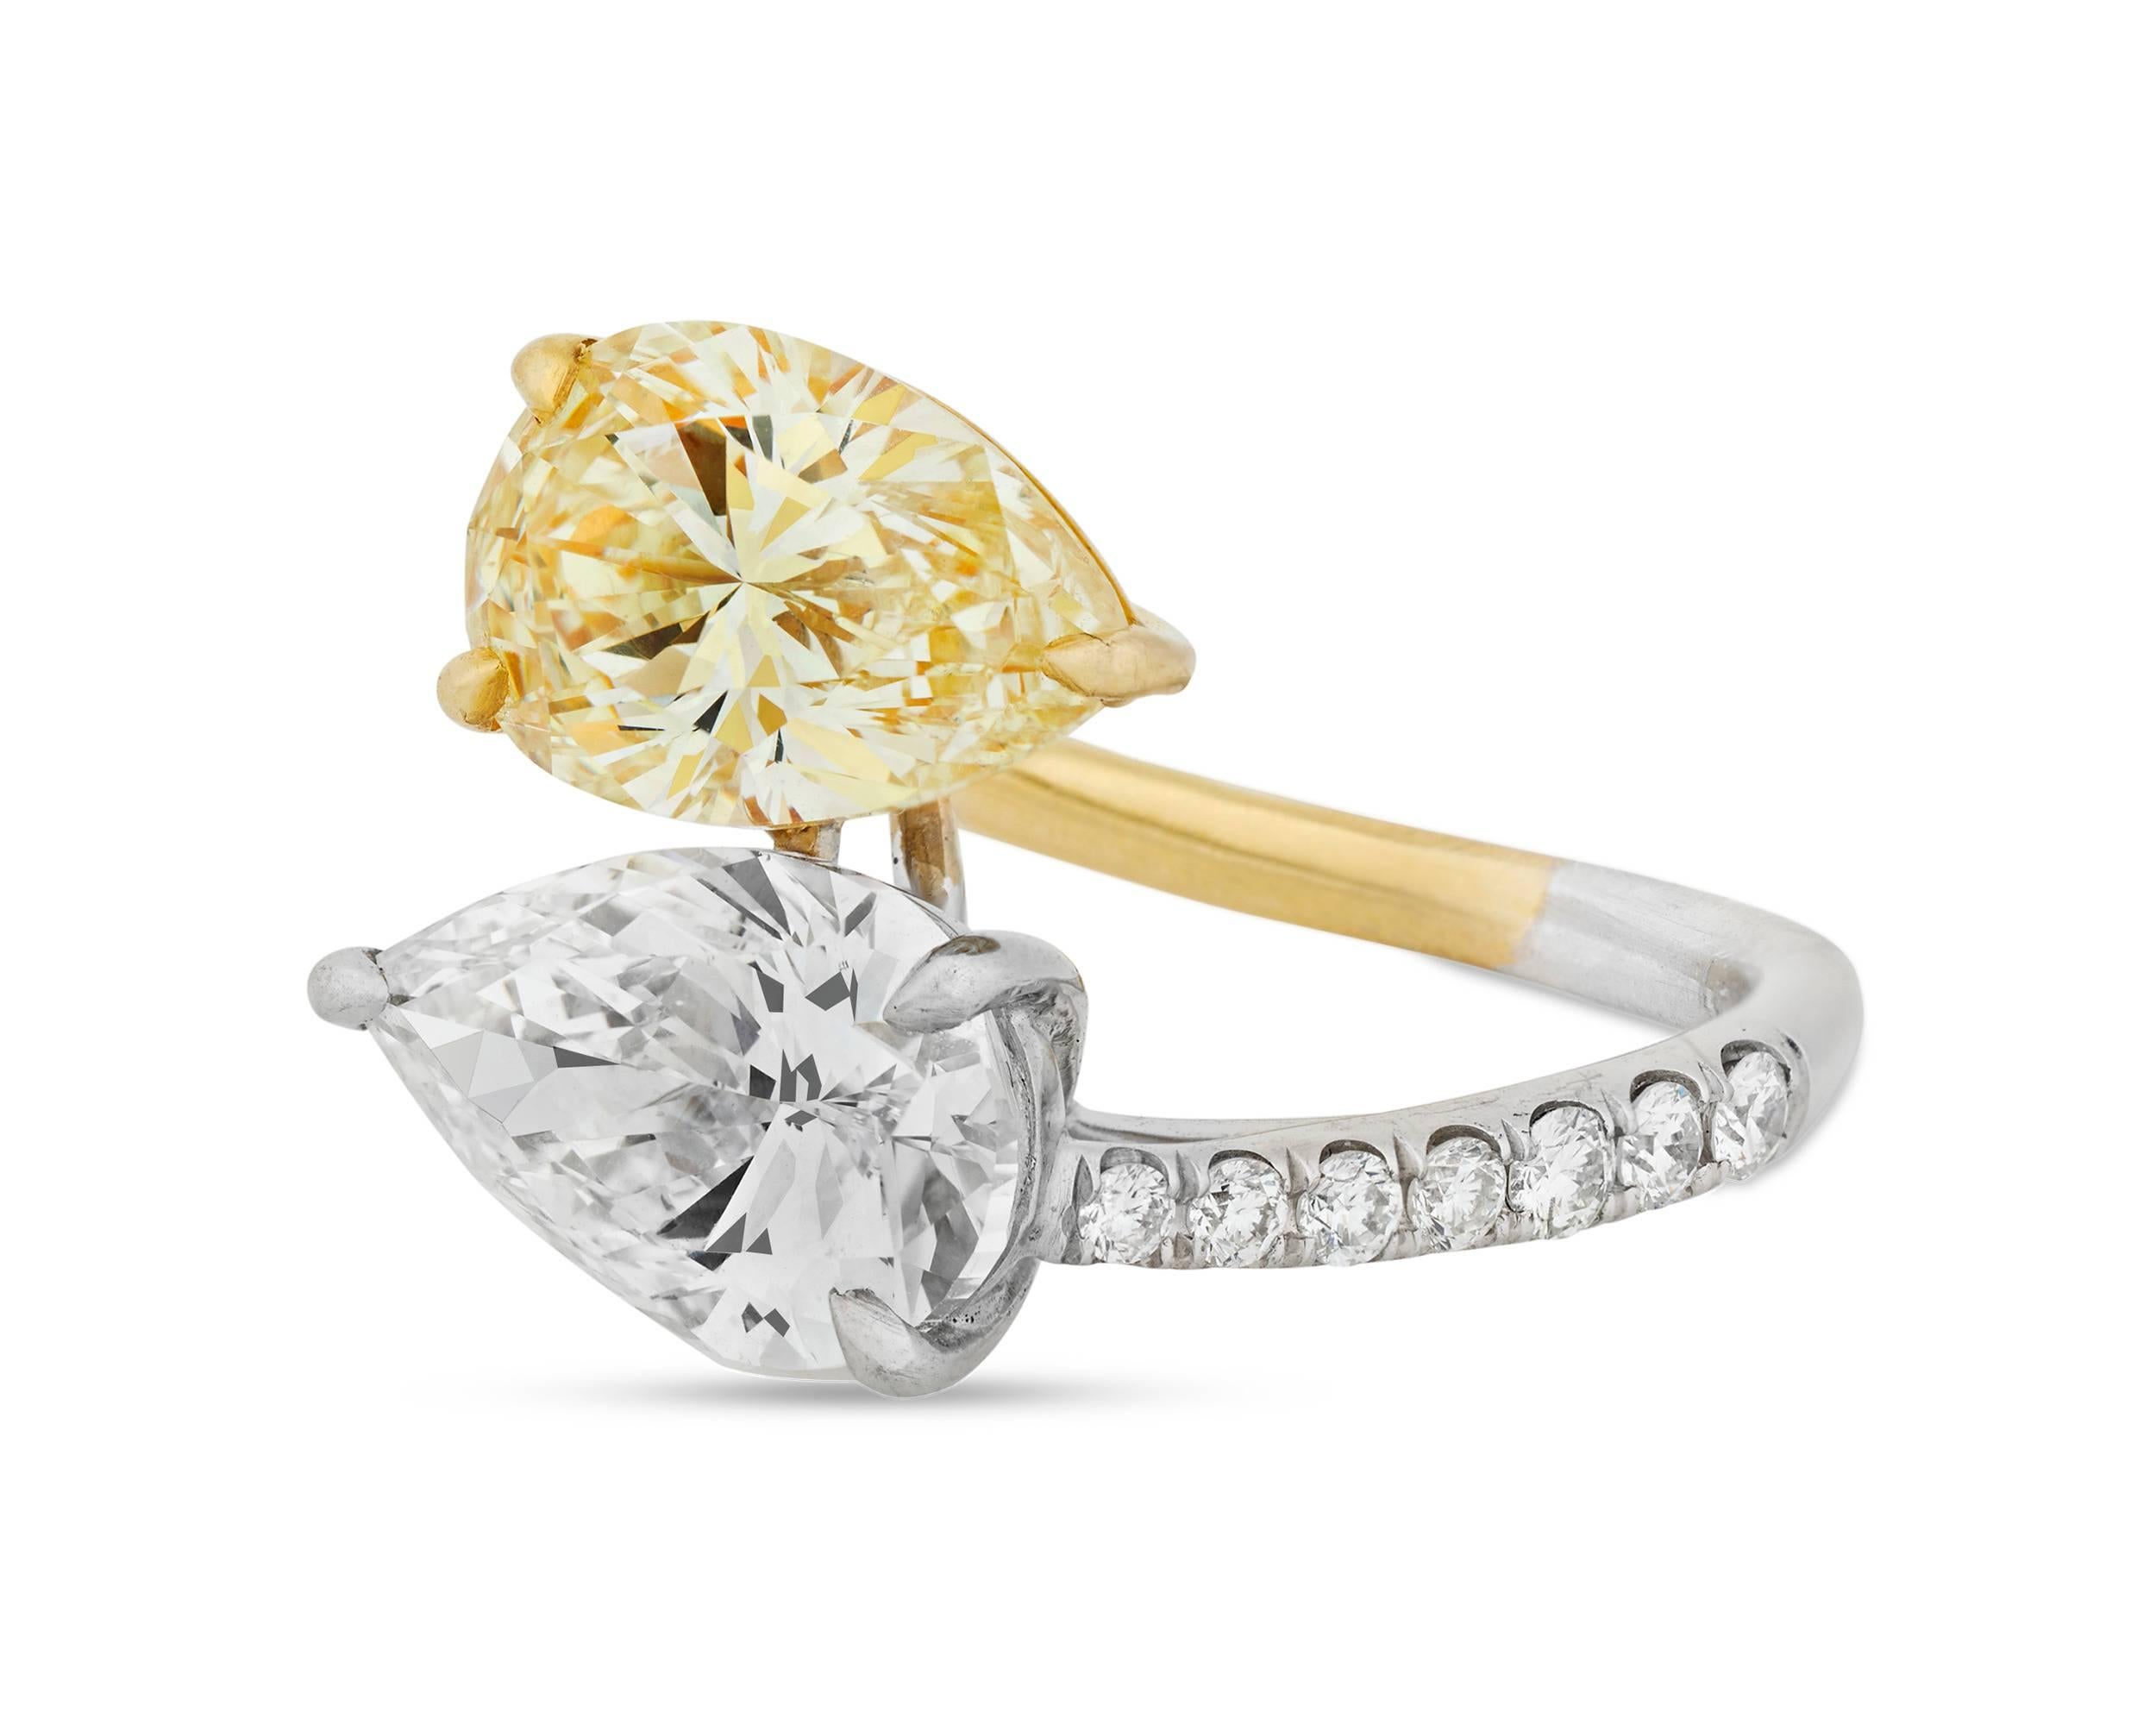 Two rare pear-shaped diamonds intersect in this exquisite bypass ring. The first, a fancy yellow diamond weighing 3.09 carats, exhibits a highly coveted canary yellow hue, making it the perfect pair to the H-color white diamond weighing 3.01